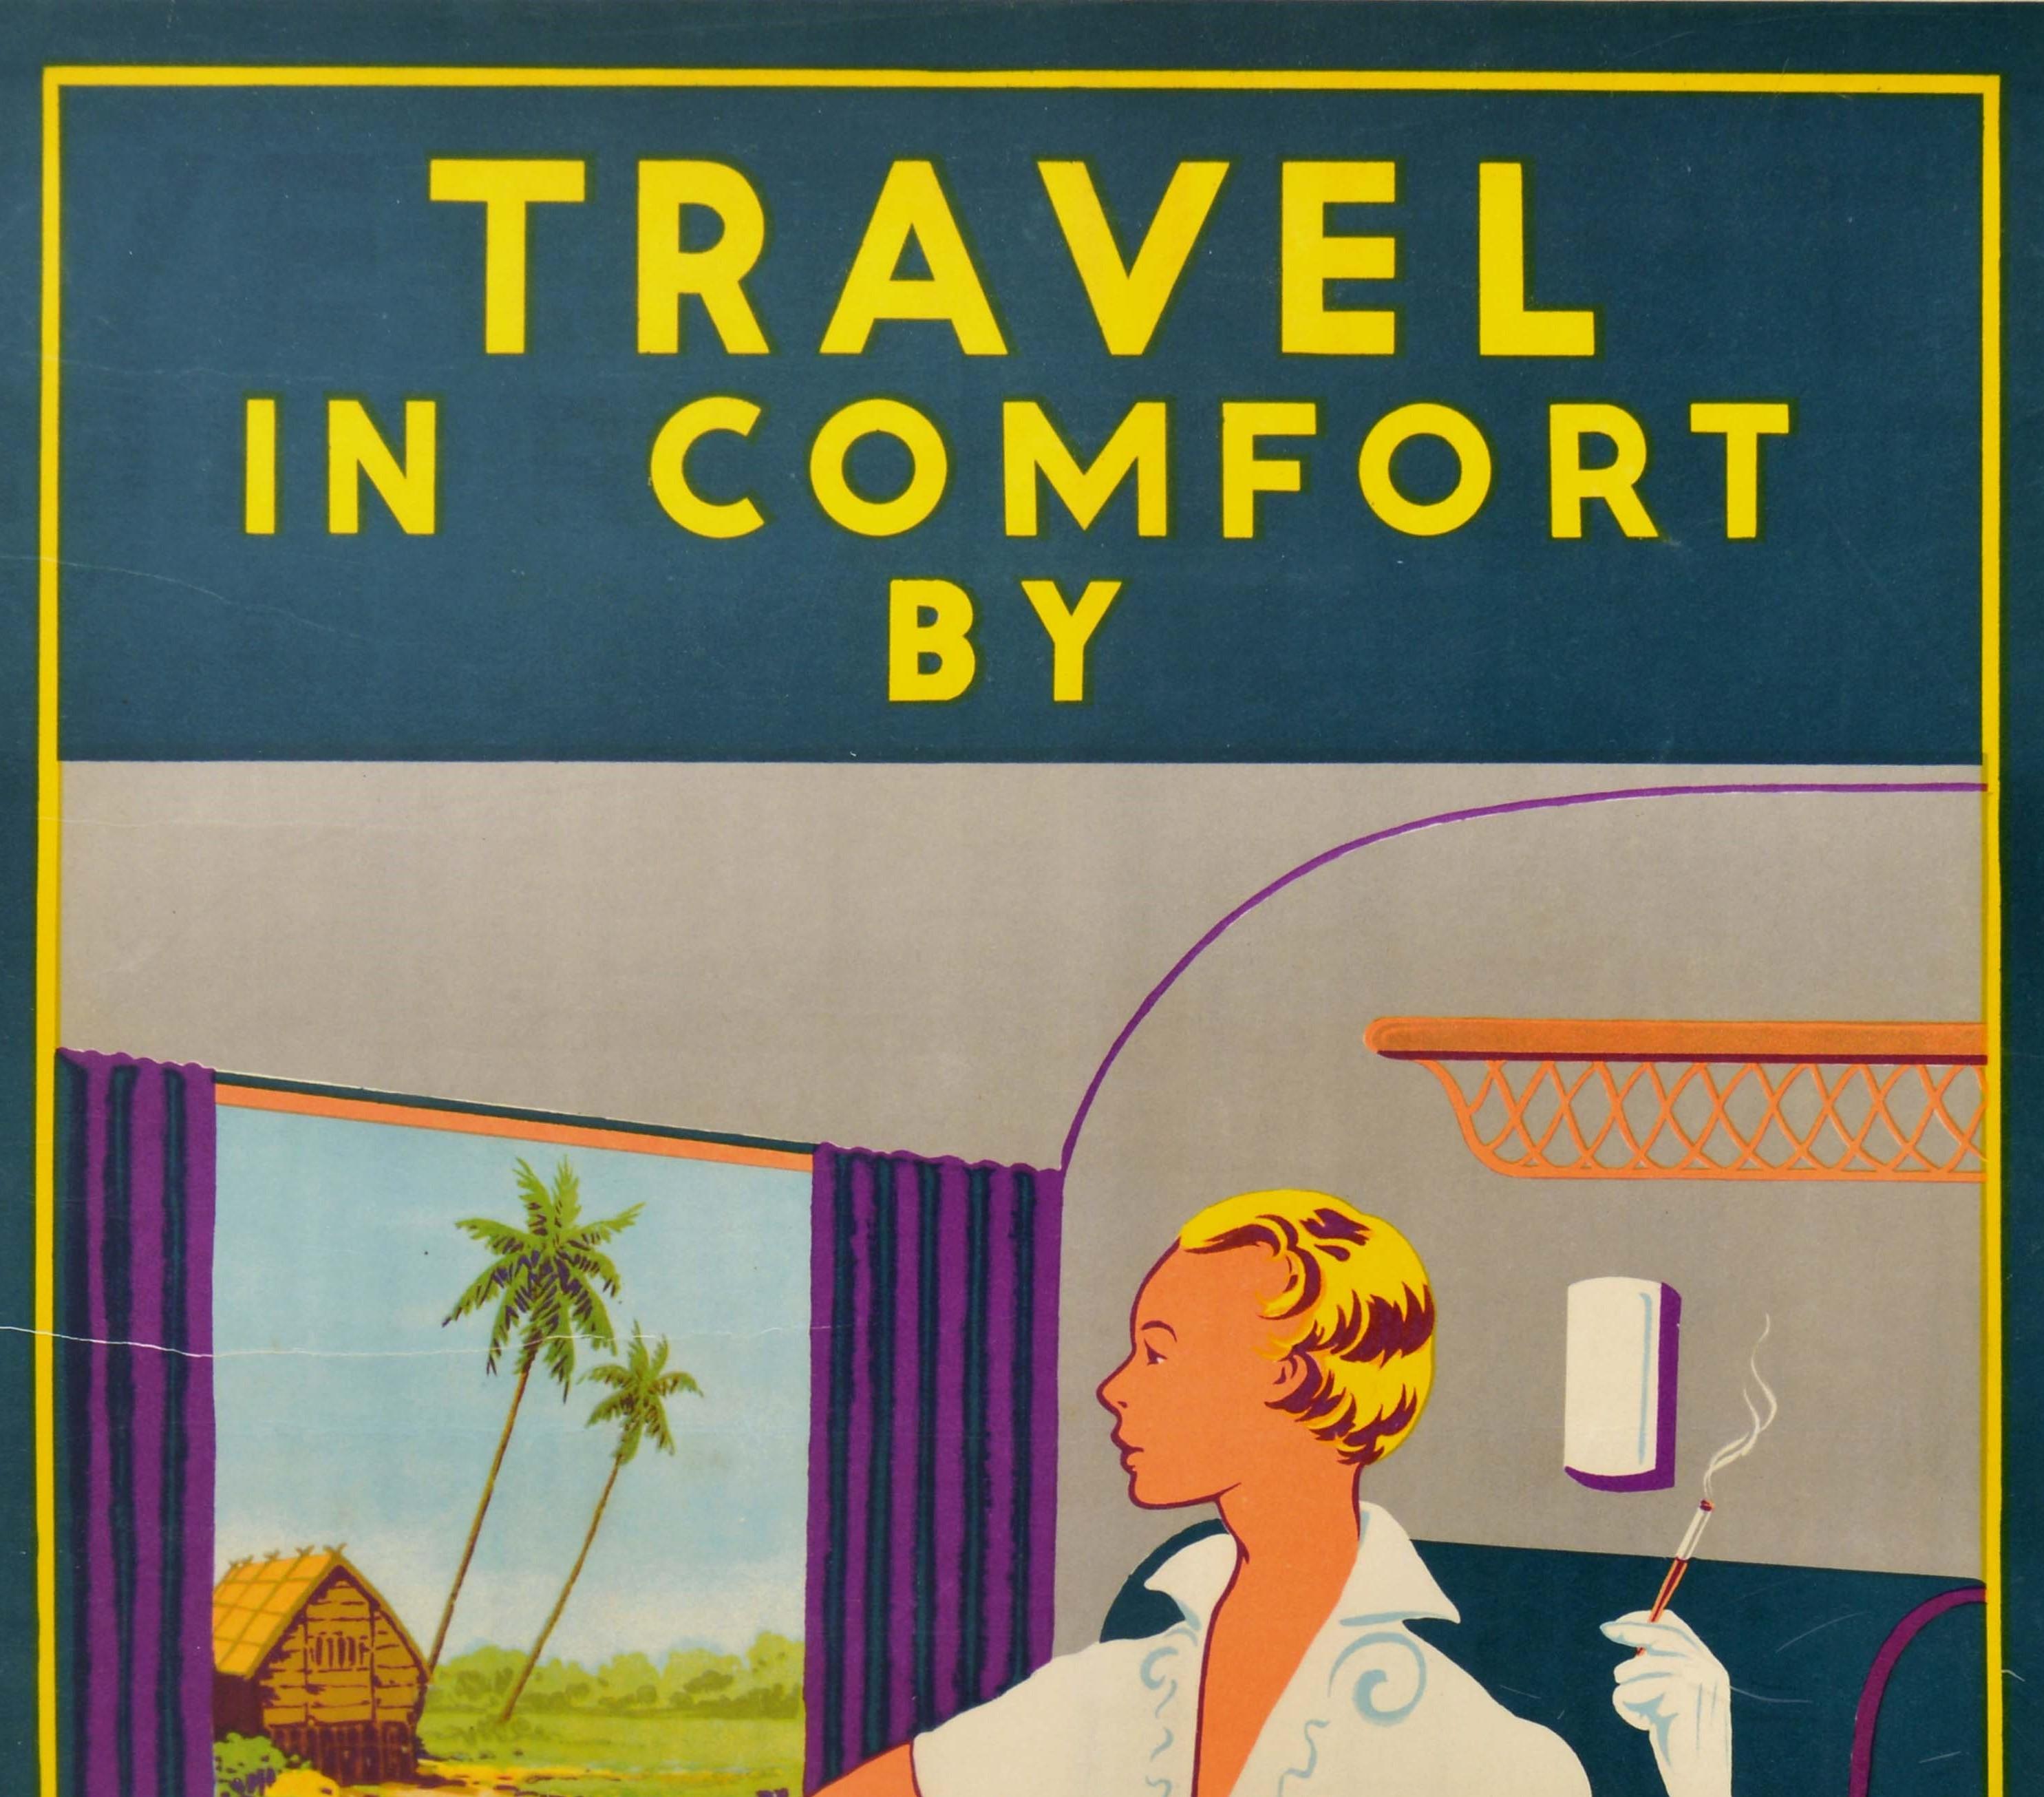 Original Vintage Art Deco Poster Travel In Comfort By Malayan Railway Train Asia - Print by J.R. Charton